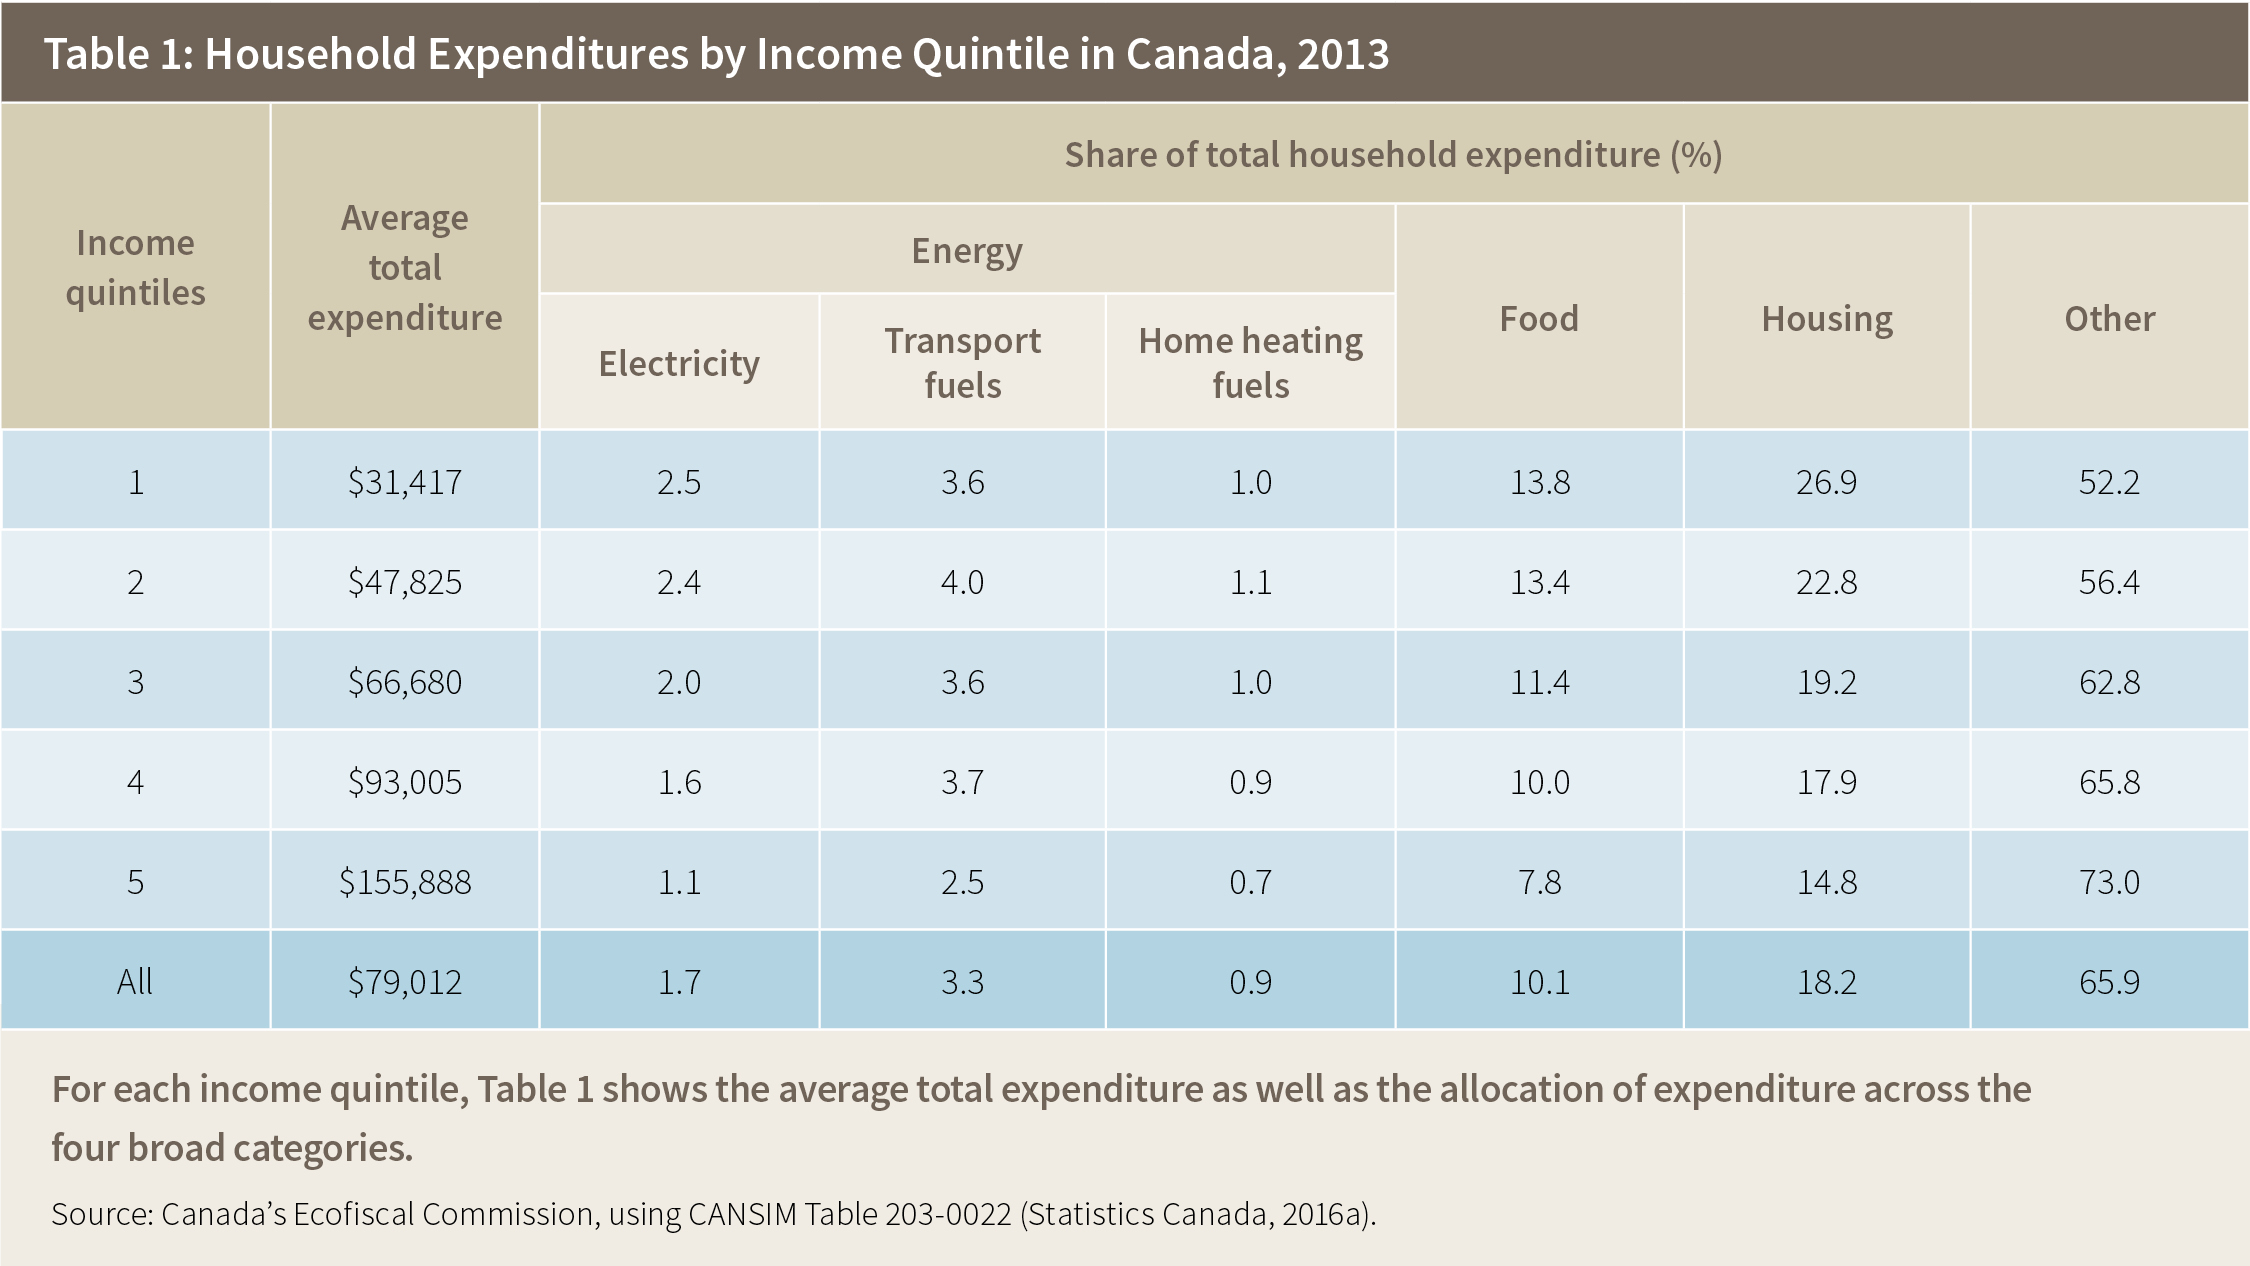 Table 1: Household Expenditures by Income Quintile in Canada, 2013